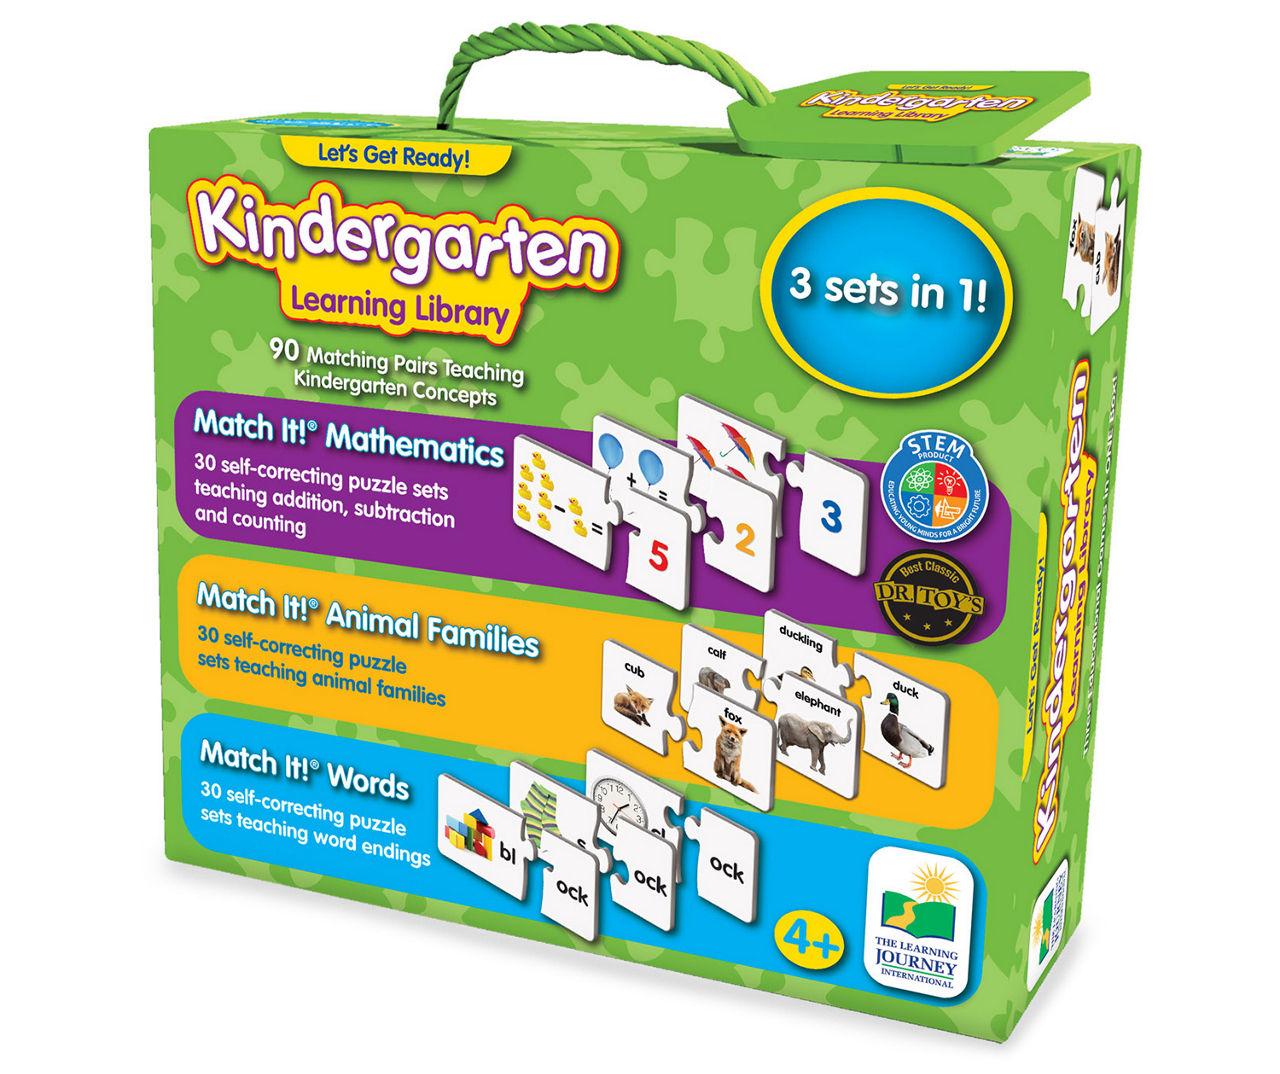 Details about   The Kindergarten Learning Library 3 sets in 1 NEW FAST FREE SHIPPING 